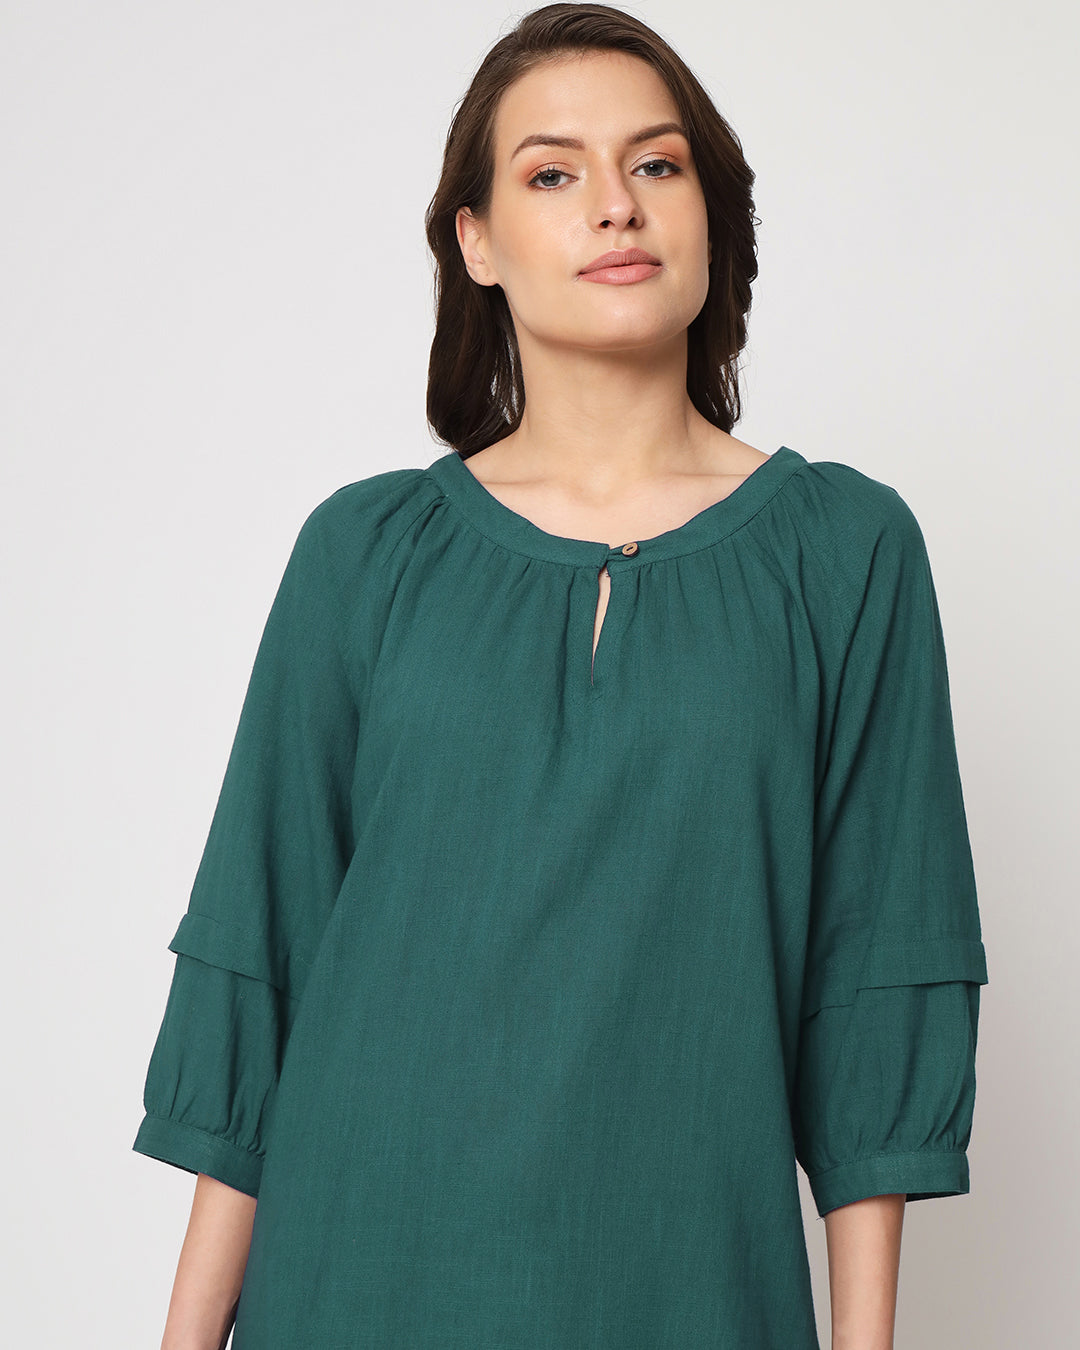 Deep Teal Button Neck Solid Top (Without Bottoms)